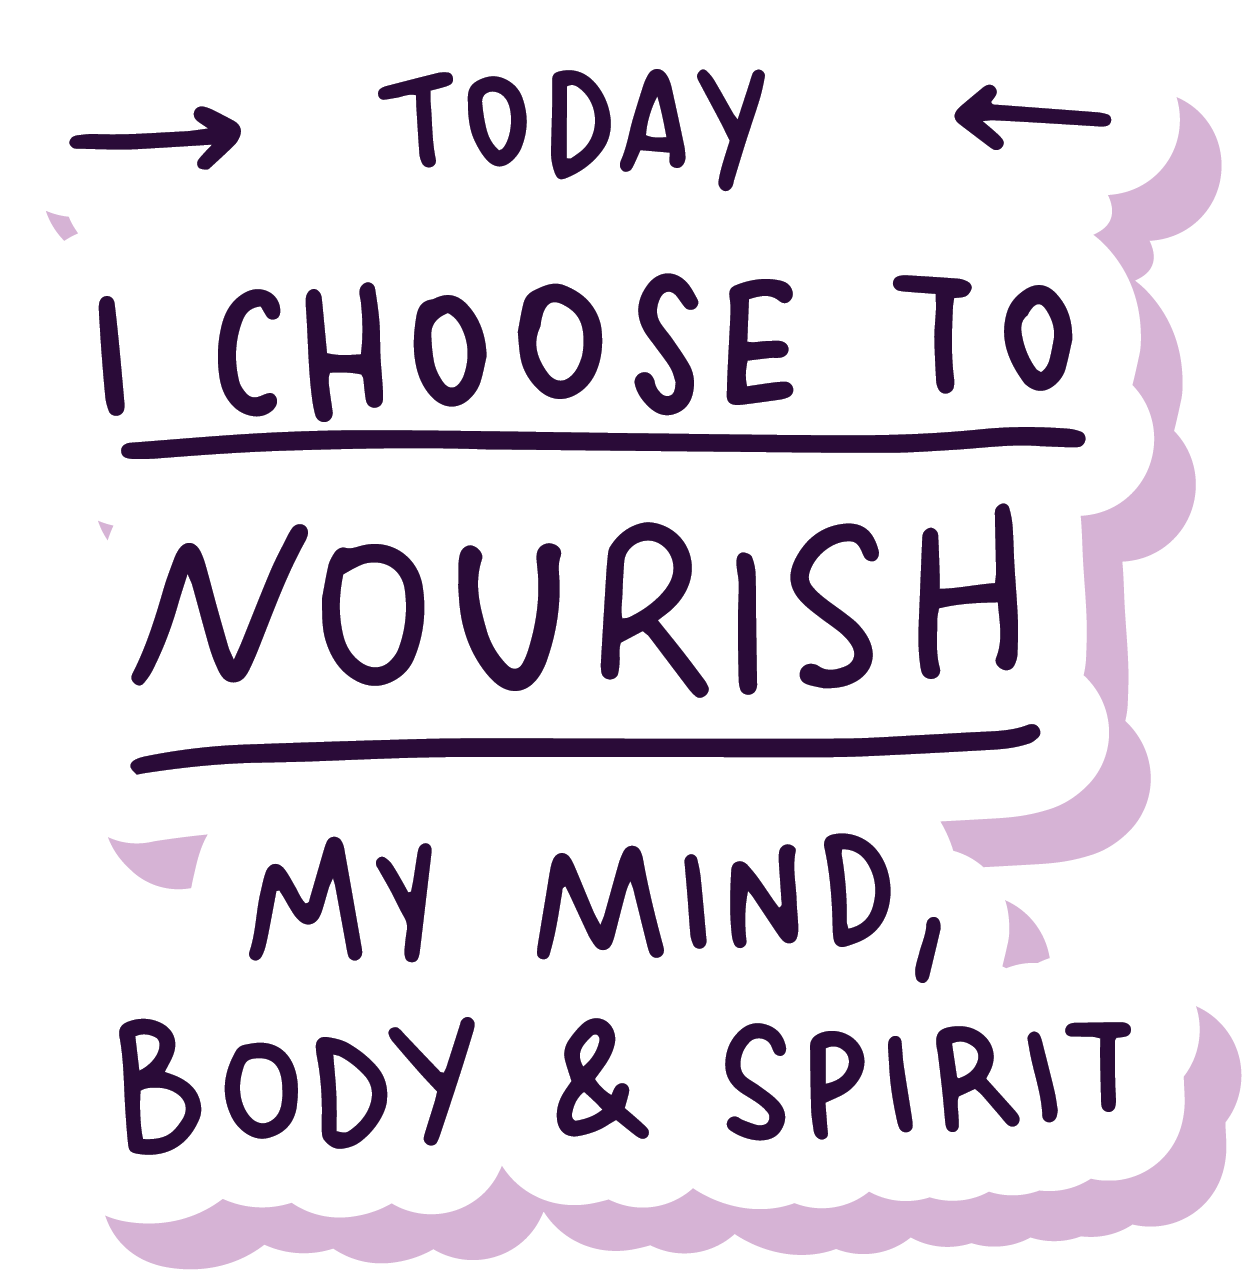 Glossy Sticker that says Today I choose to nourish my mind, body , and spirit